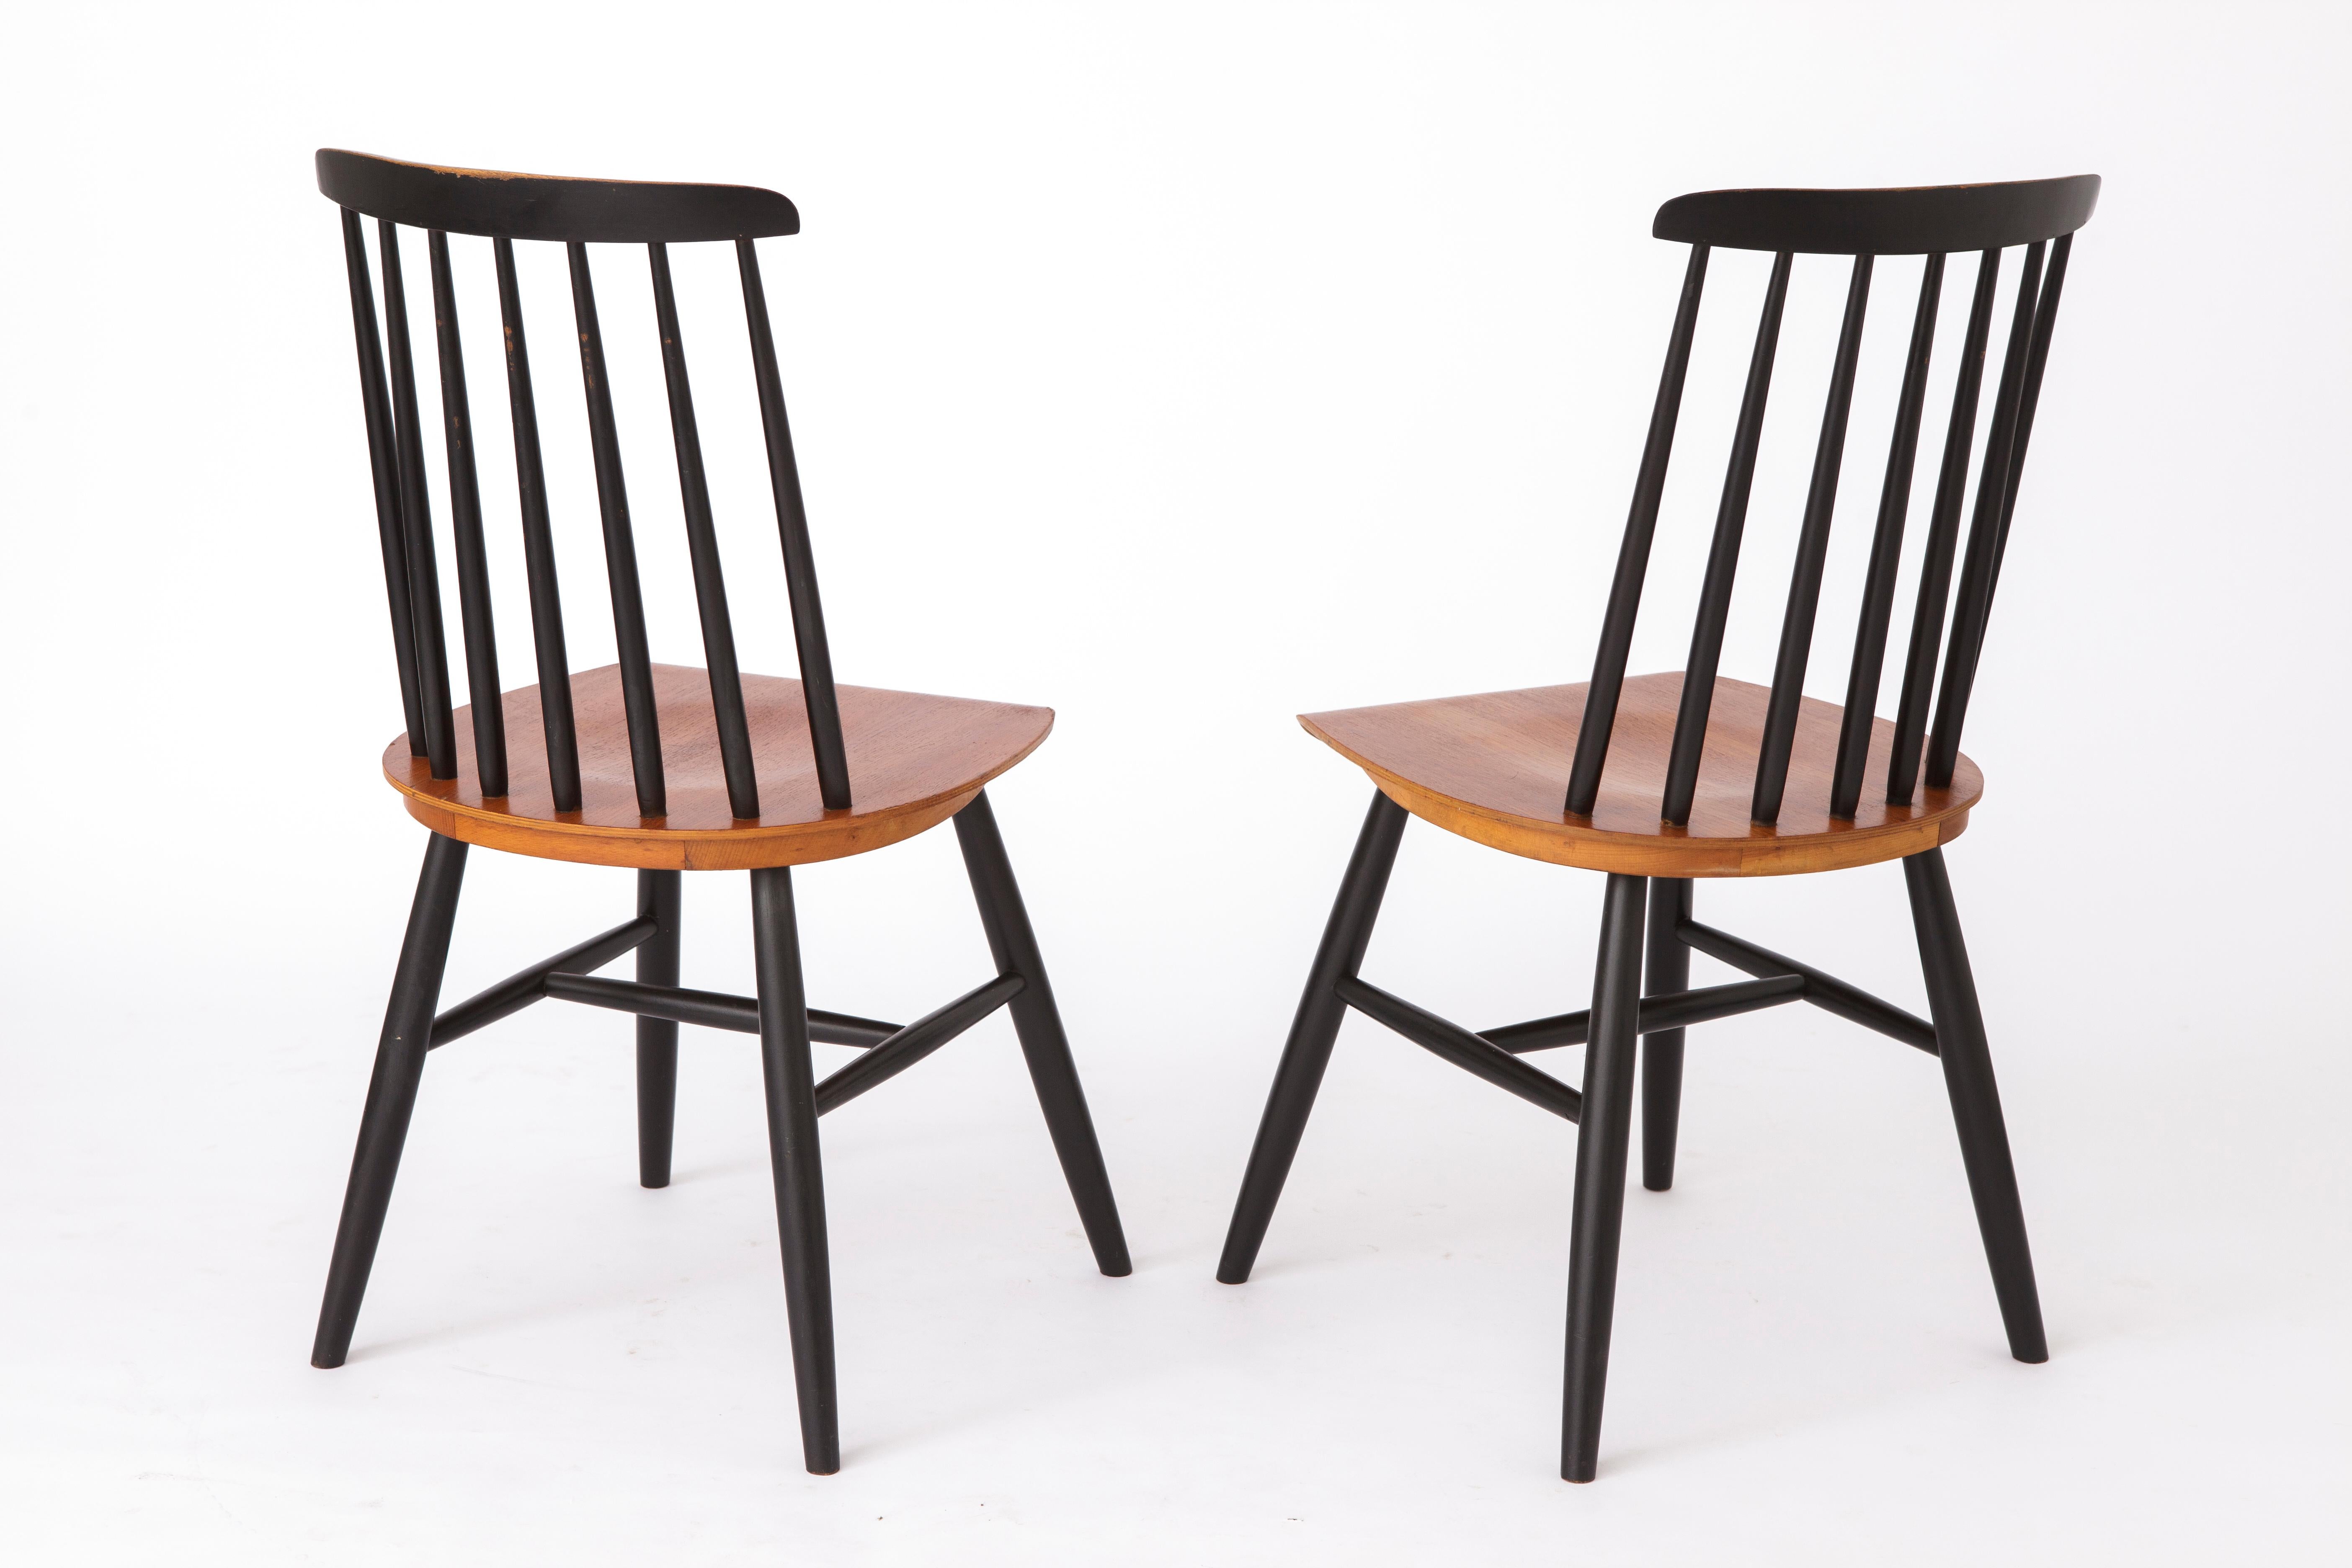 Mid-20th Century 2 Vintage Spindle Back Chairs 1960s-1970s - Sweden For Sale